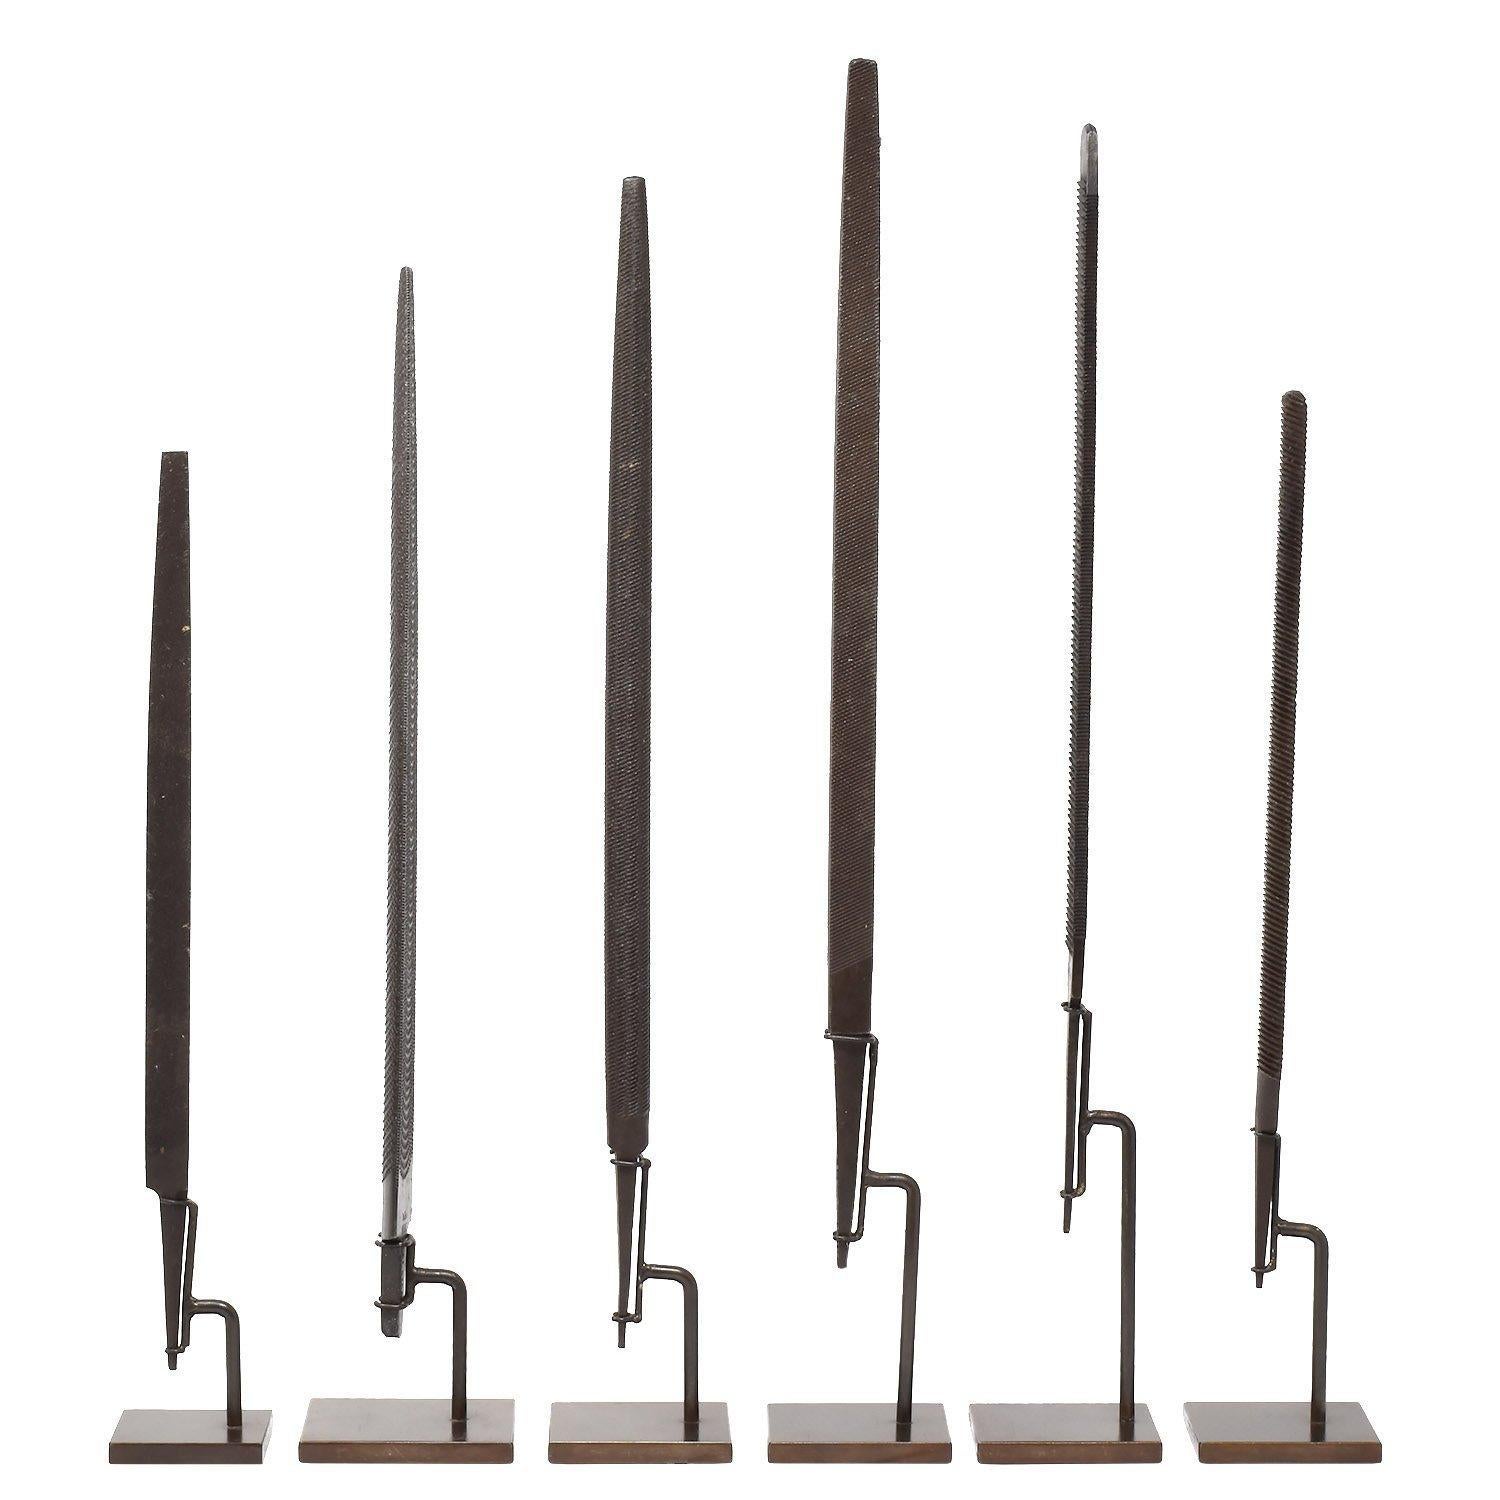 Collection of Six vintage woodworking files

United States
20th century
Cast steel
Height on custom display stands: 16.25 - 22.75 in. / 41 - 58 cm.